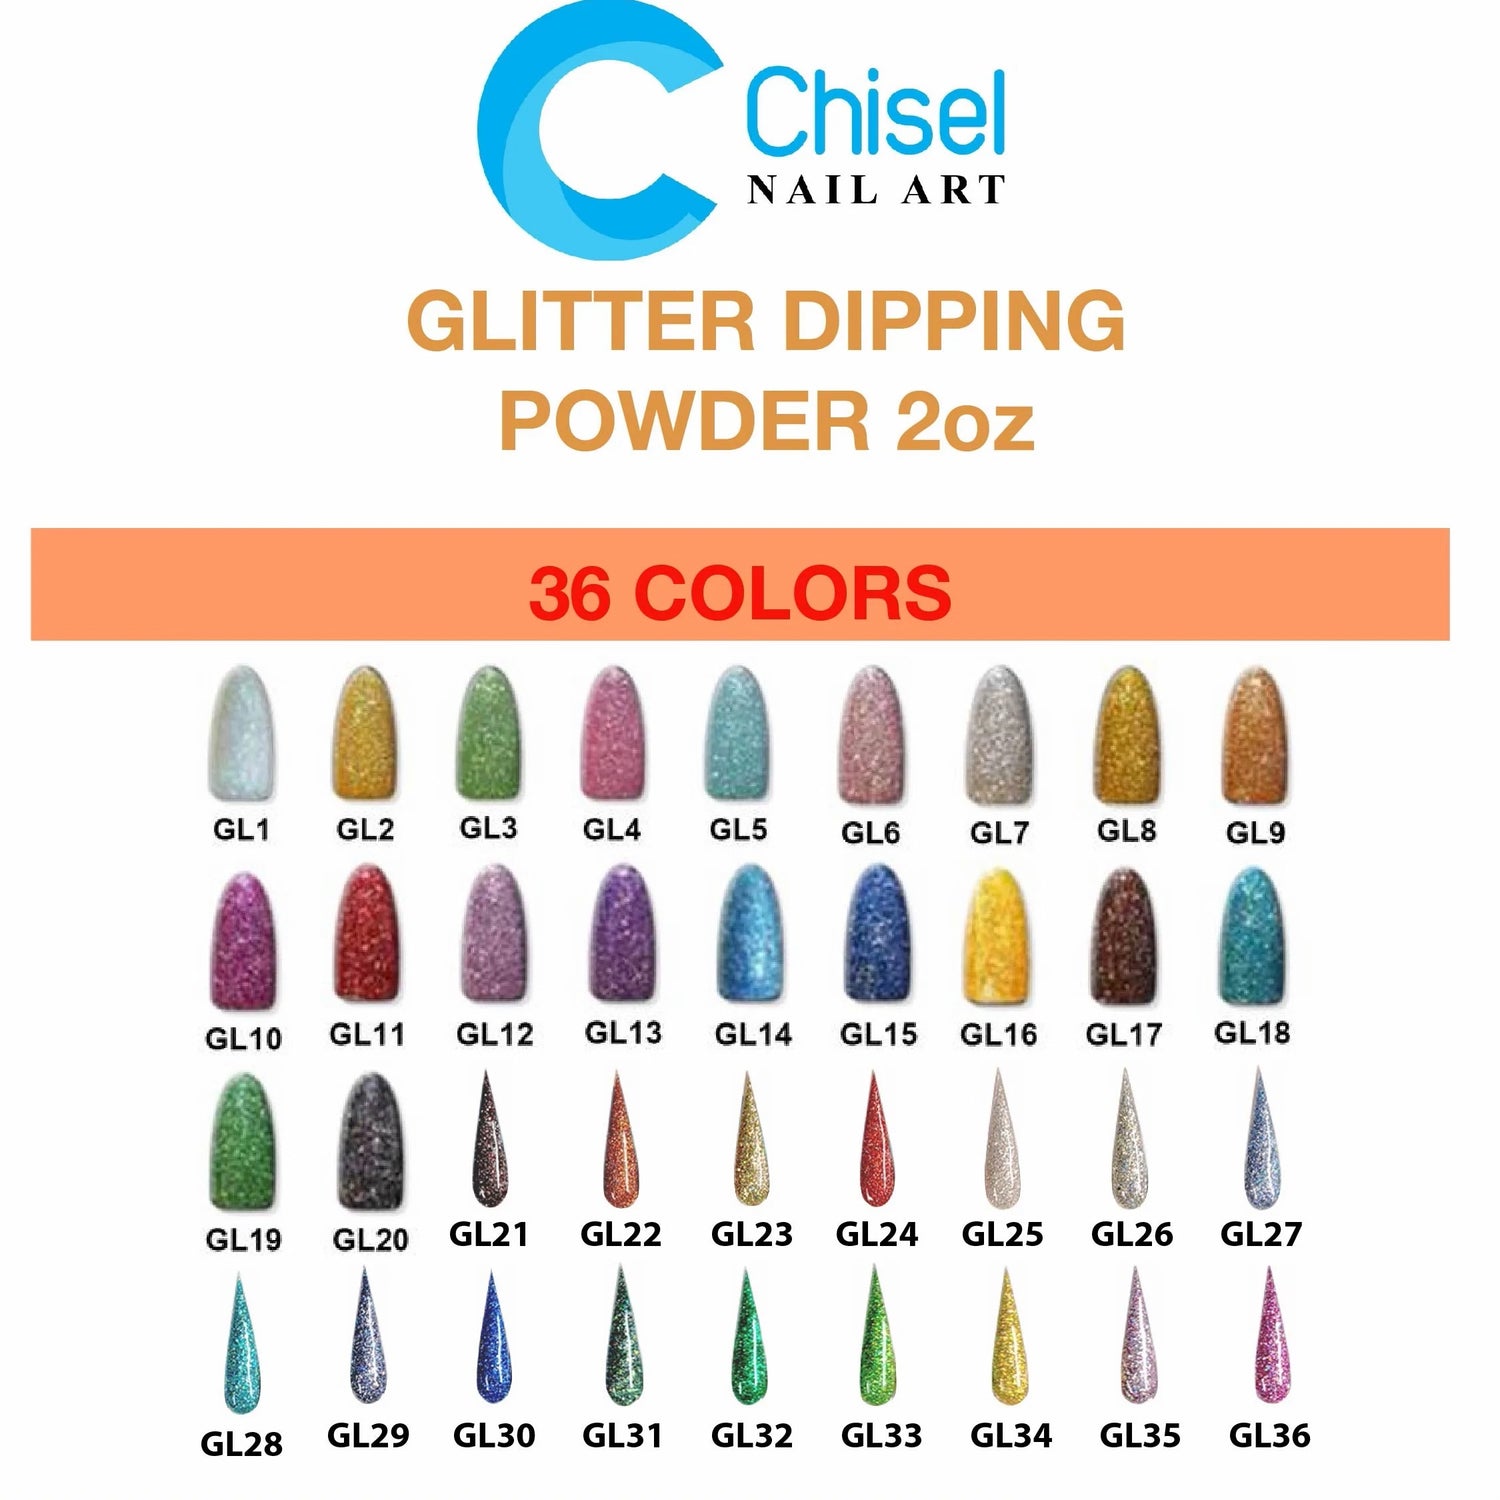 Chisel Glitter Collection